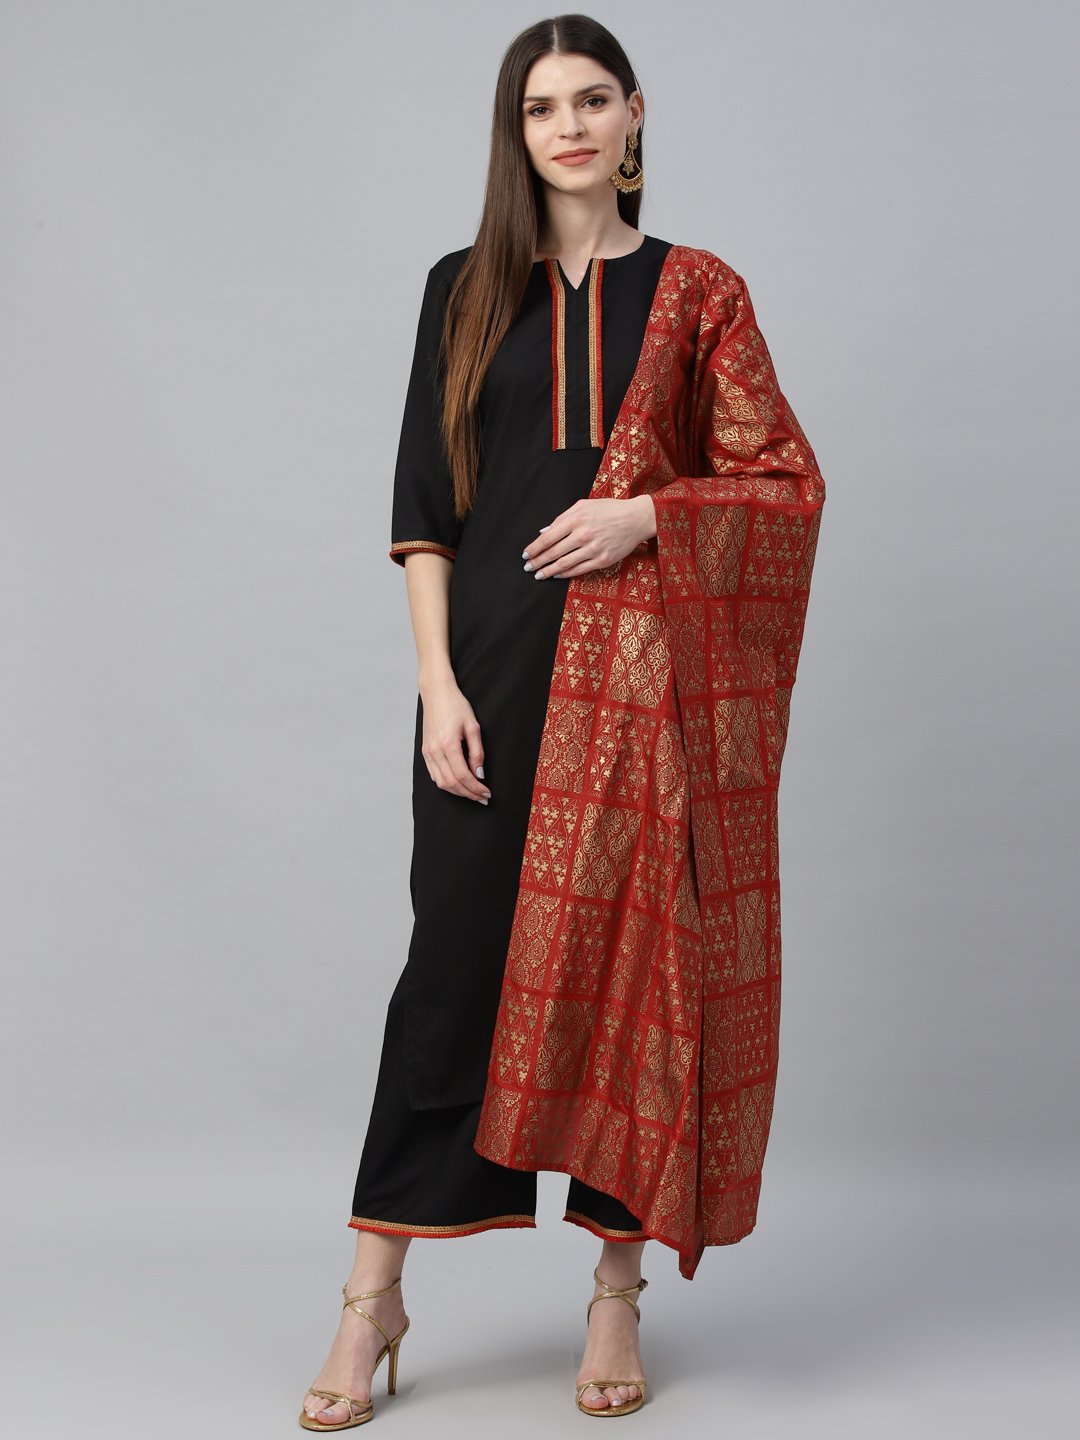 3 Ways To Style Your Black Kurta - A Rose Is A Rose Is A Rose!